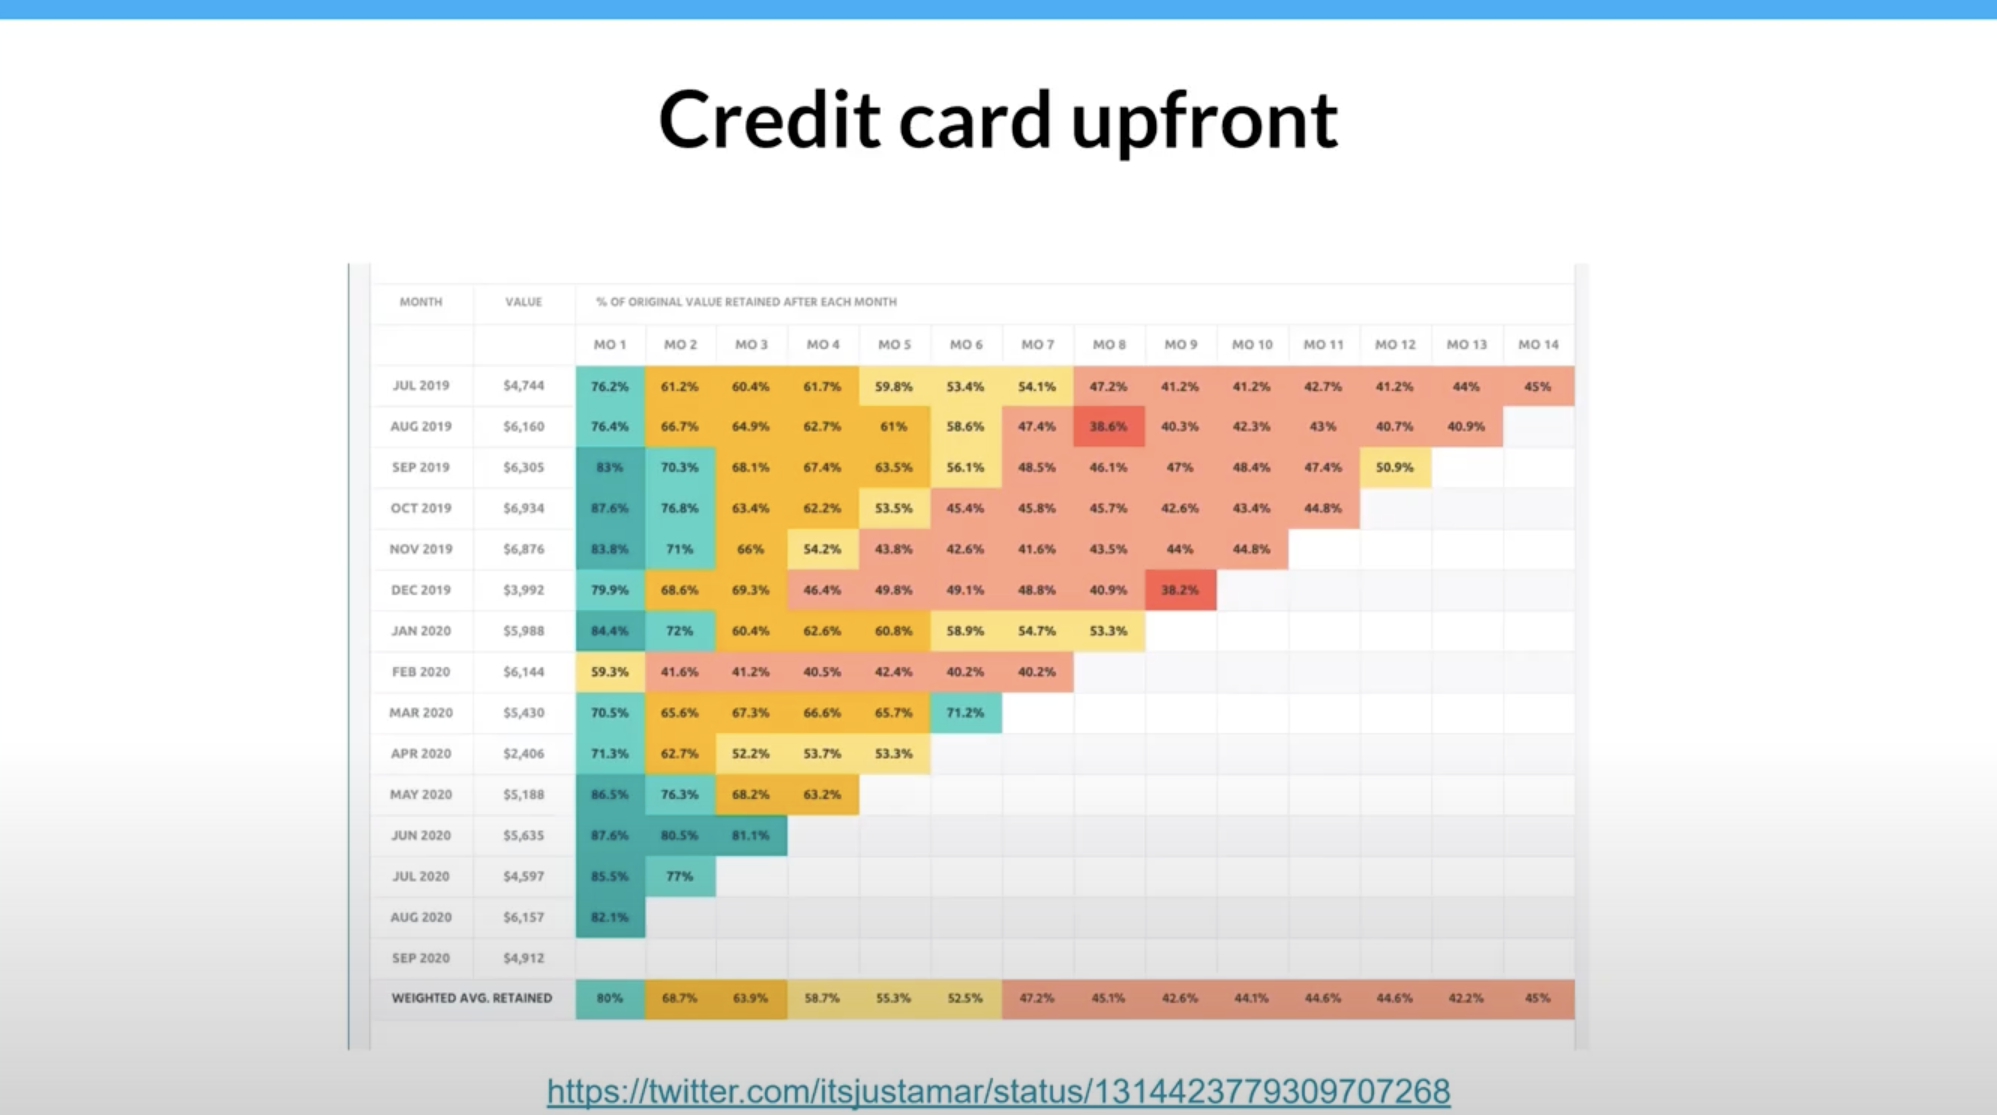 Tettra's data of users who put credit card upfront